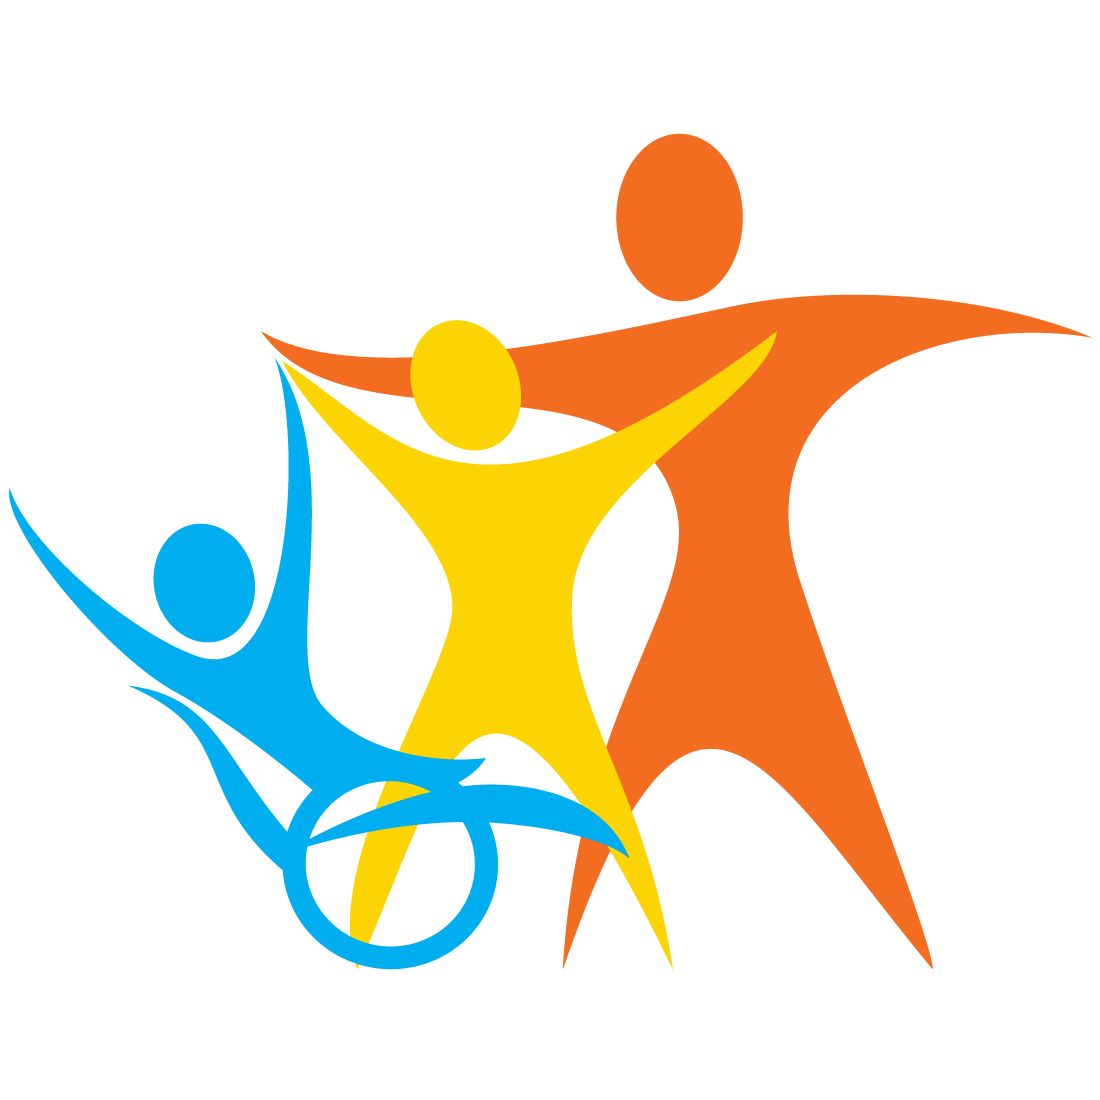 Colorful logo of people figures